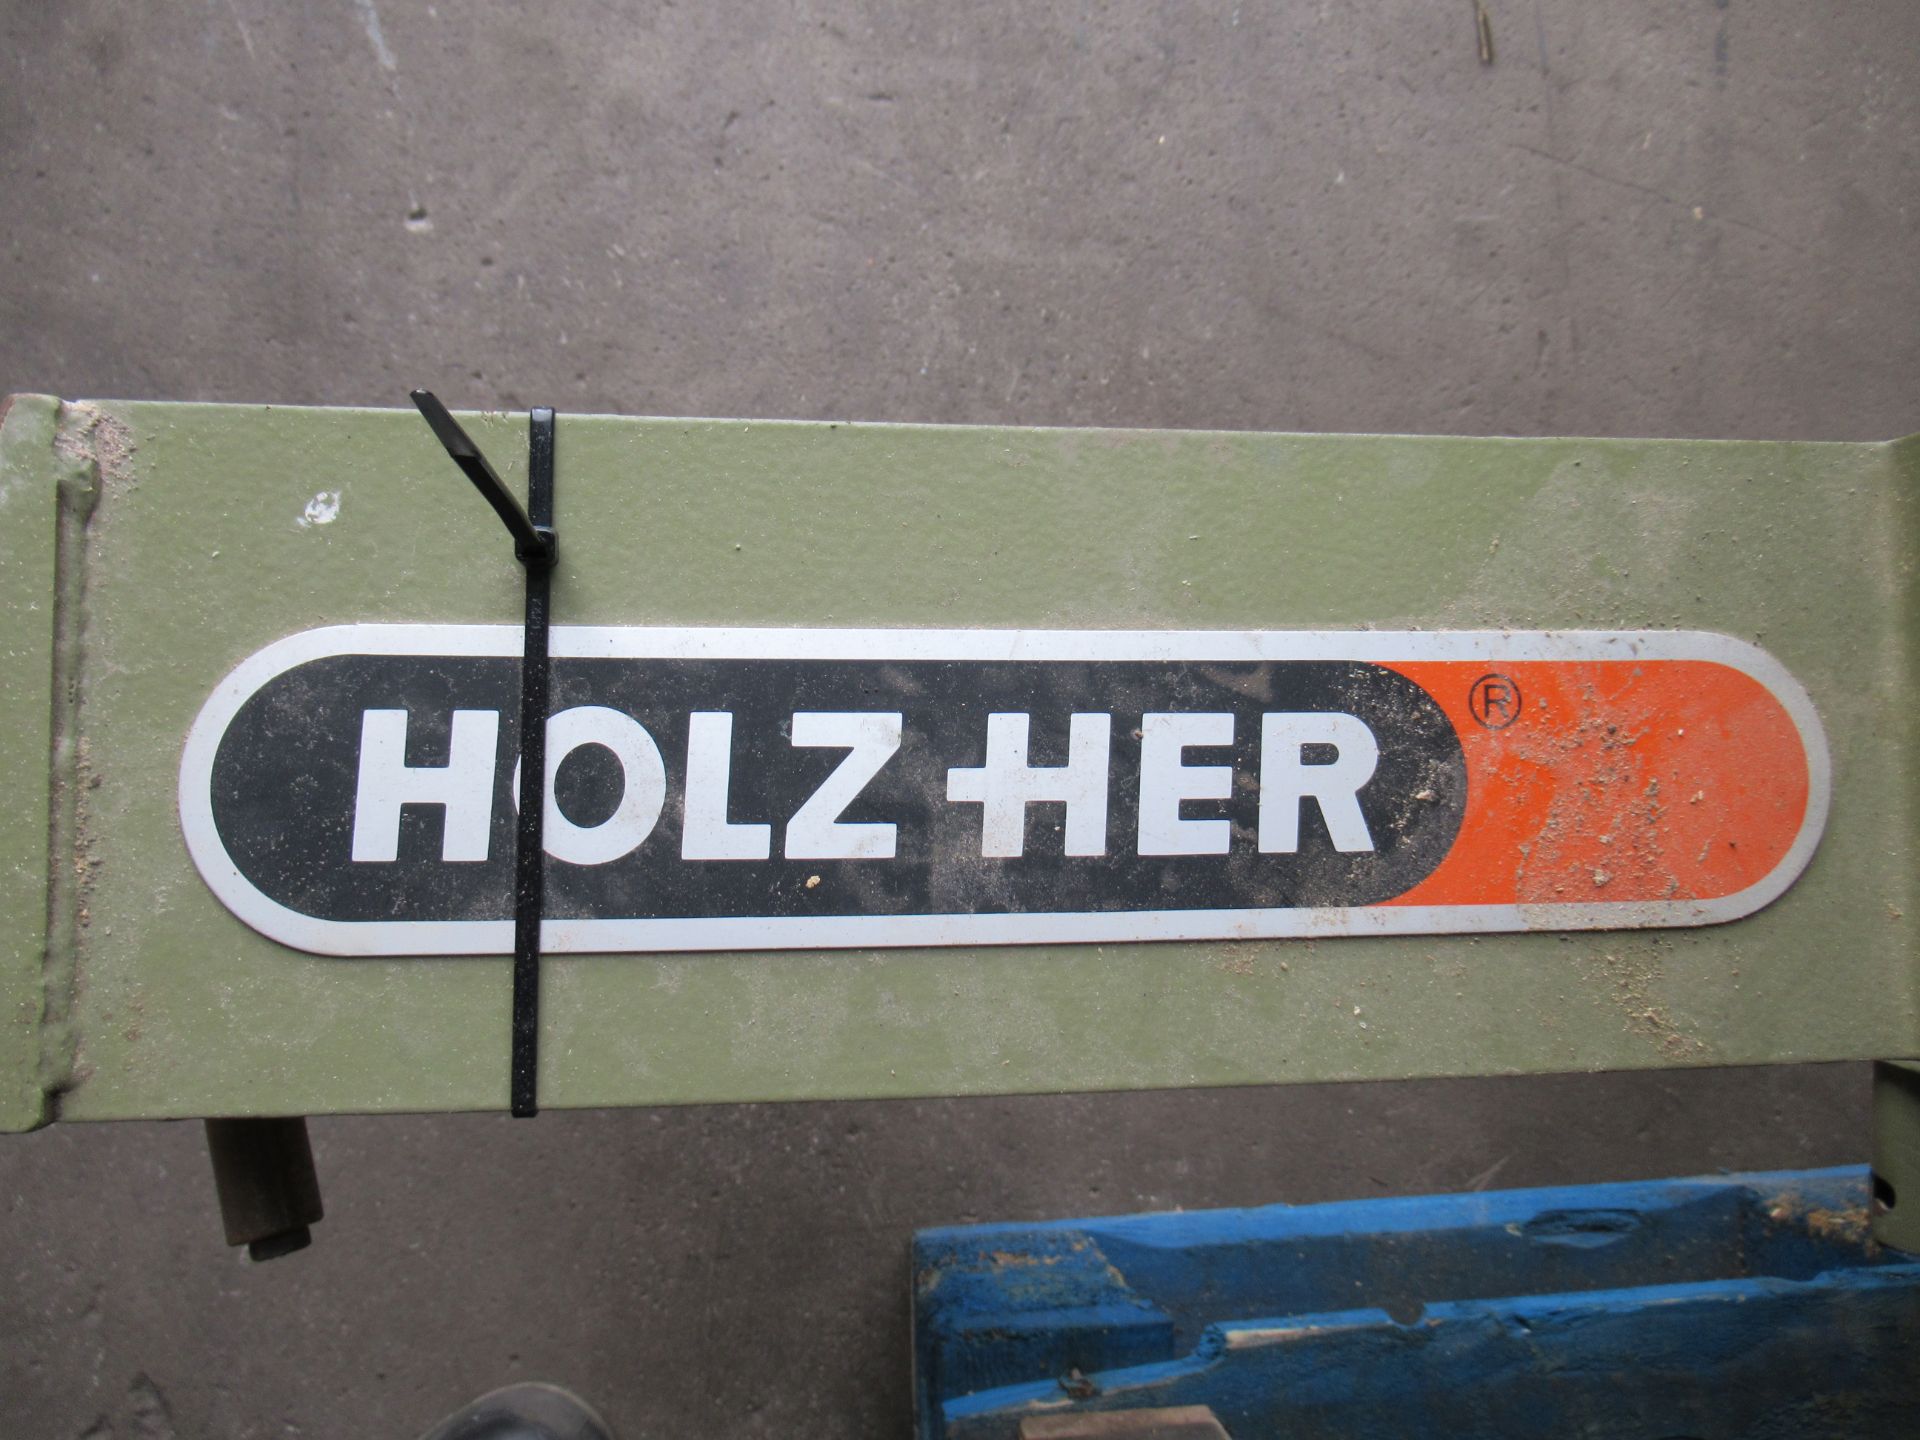 Holzher supercut 1265 wall saw - Image 9 of 13